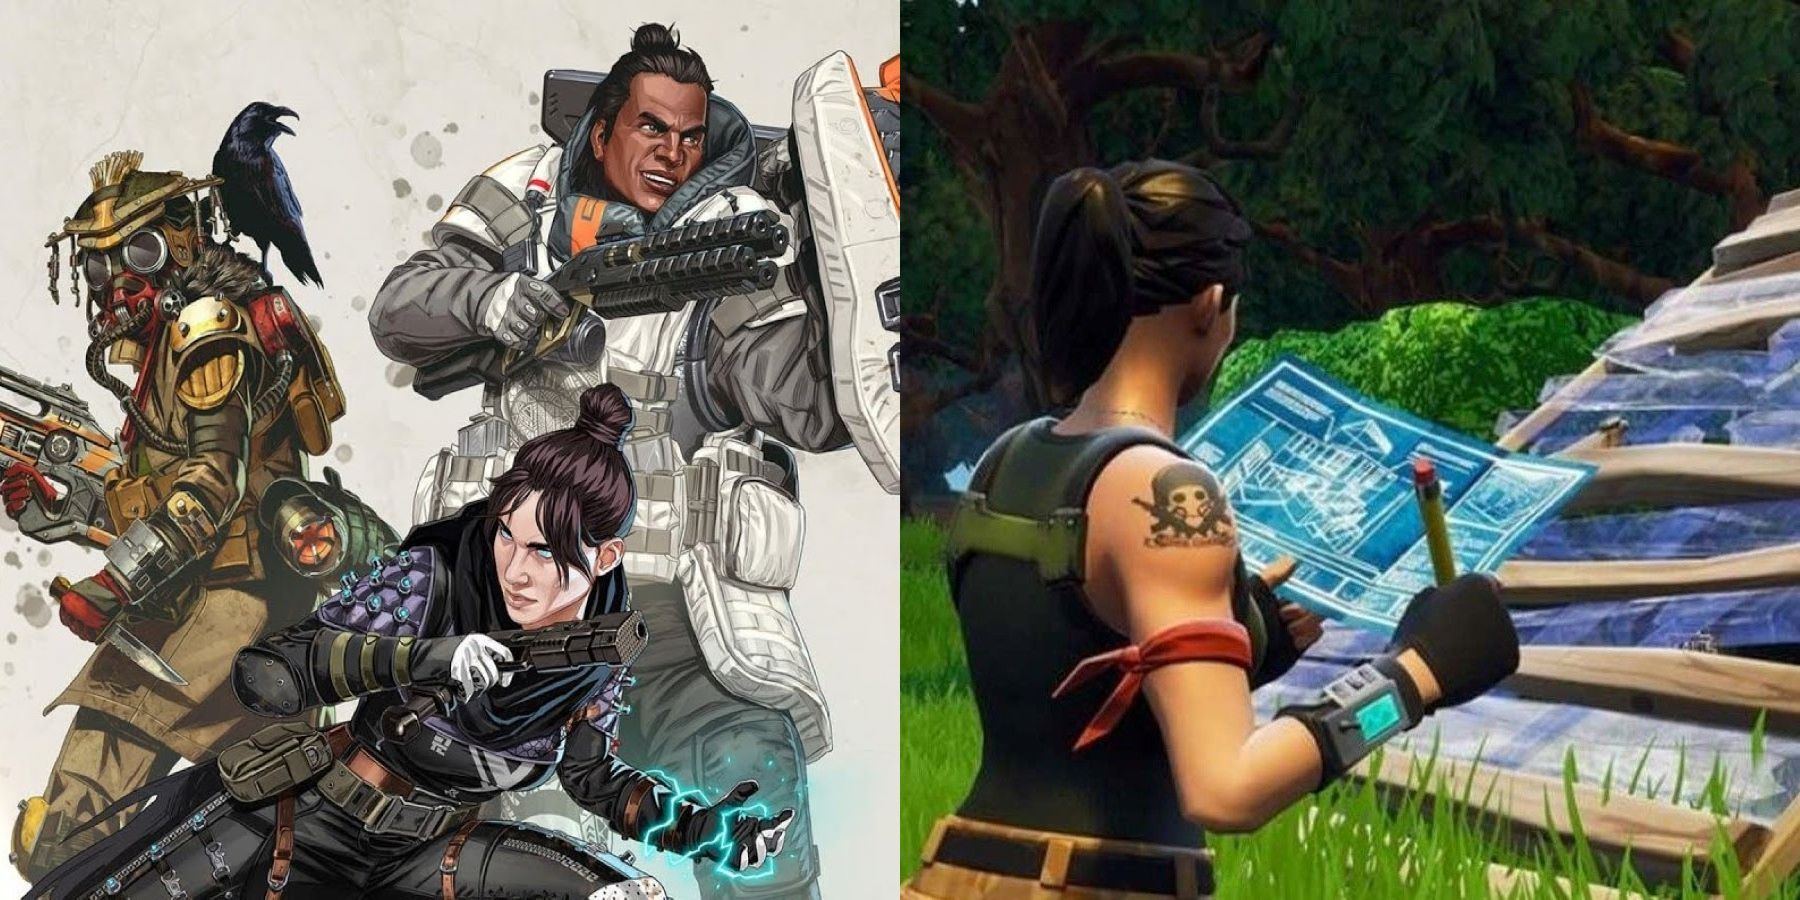 Bloodhound, Mirage, and Gibraltar from Apex Legends next to a Fortnite player building